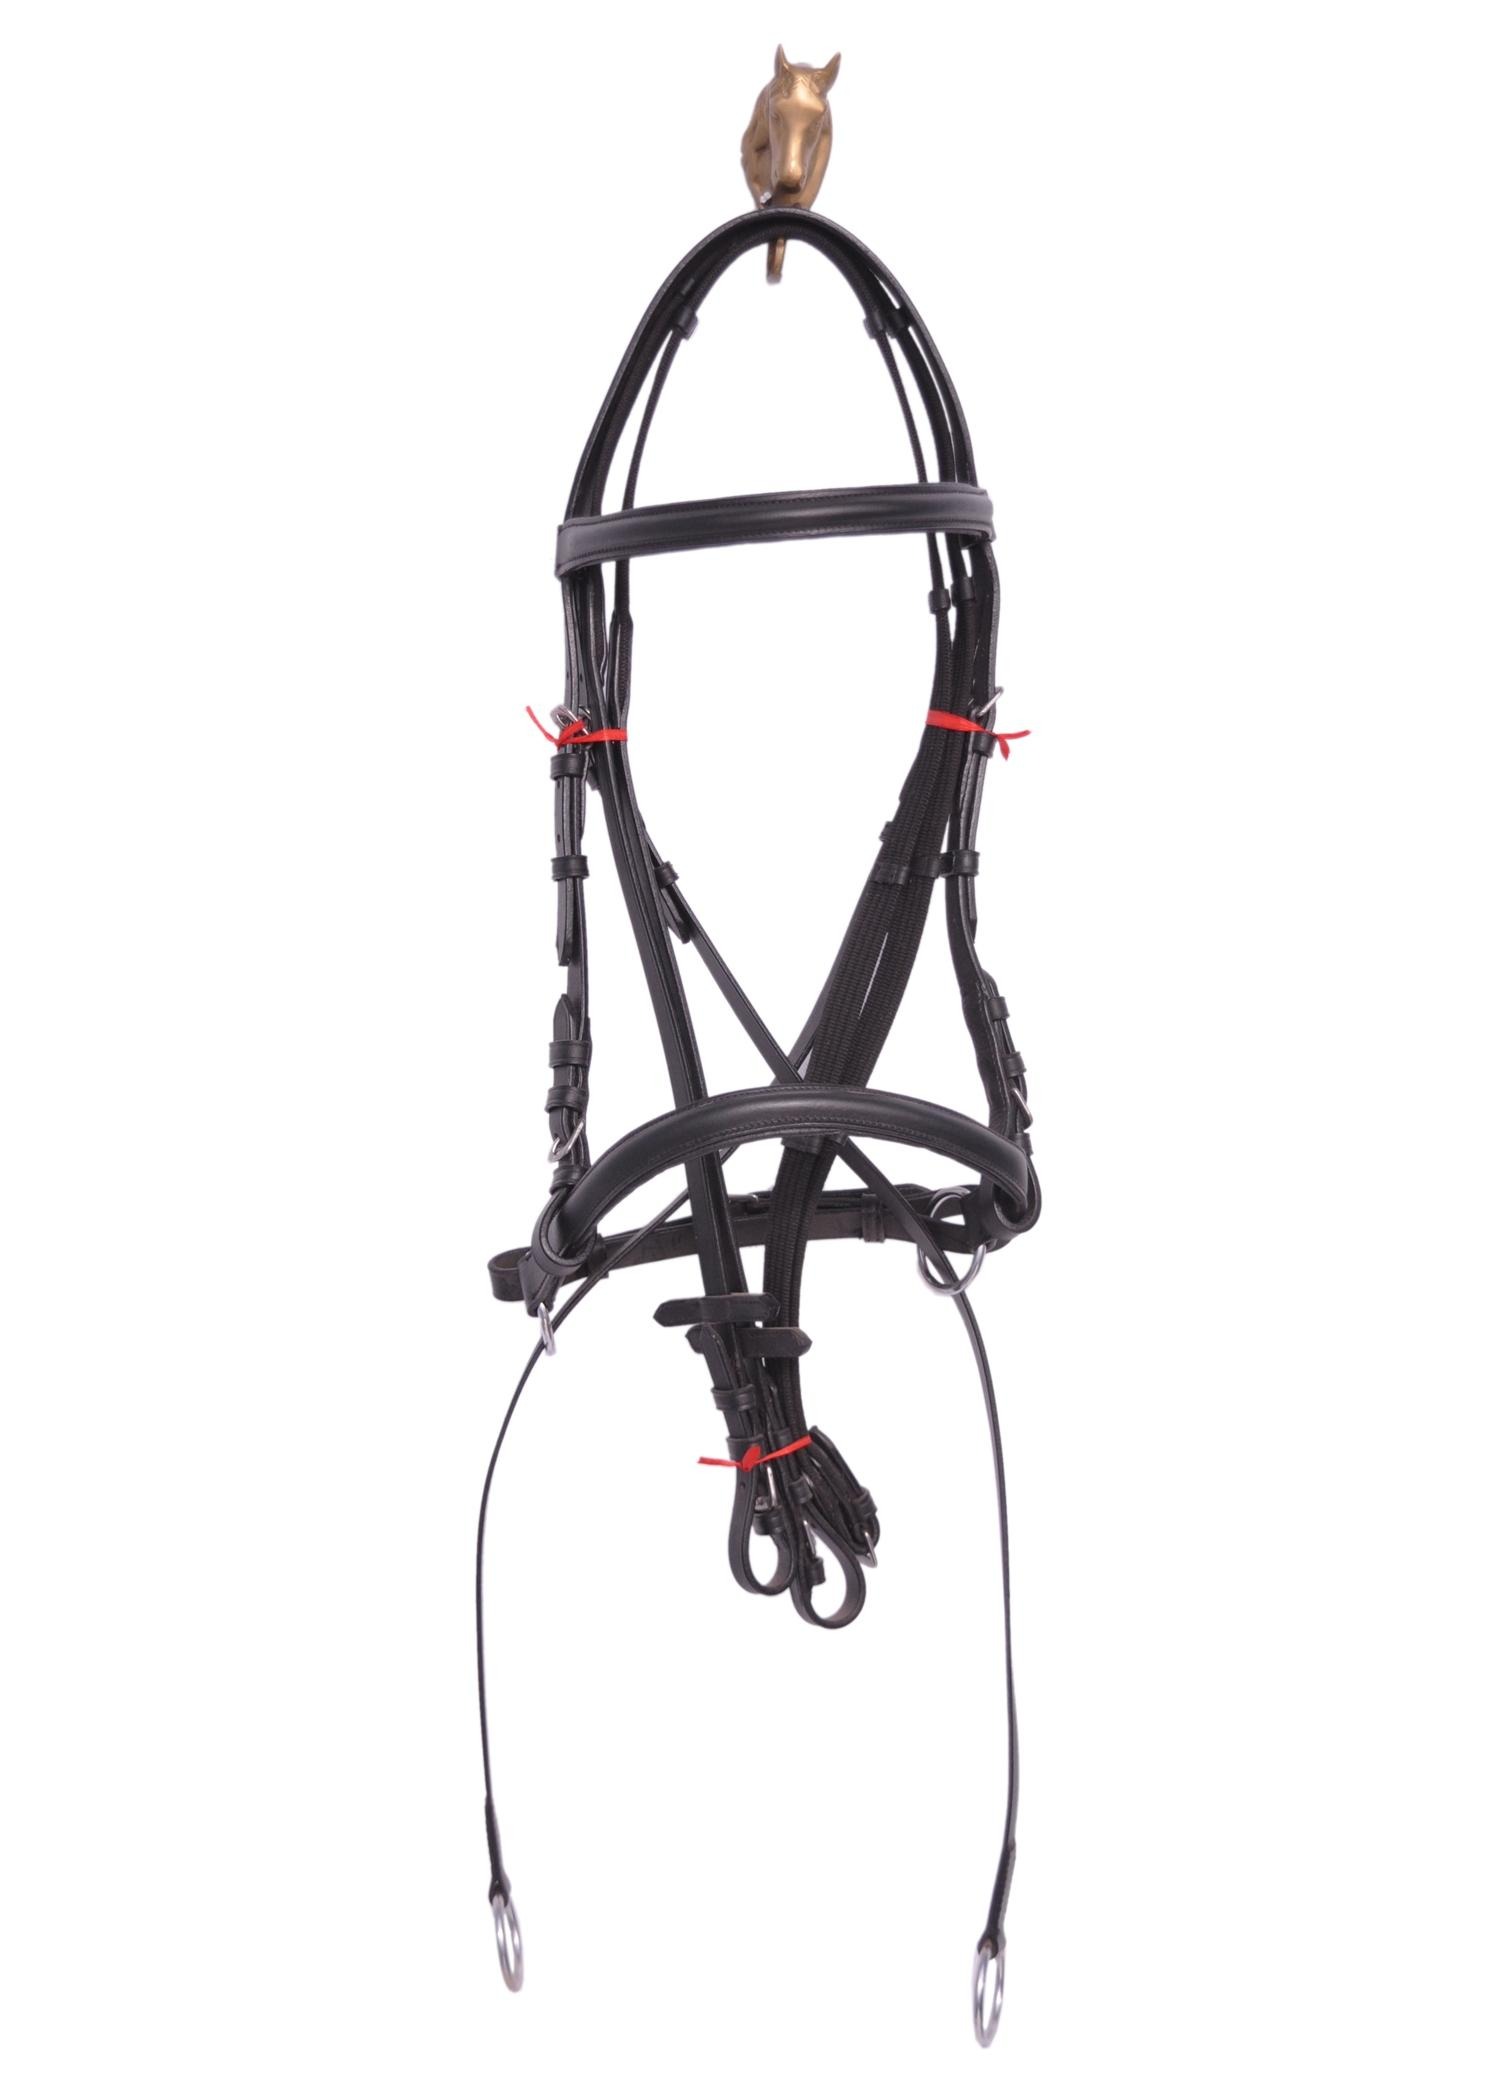 Full BLACK New ** Cross Over ** Bitless Leather Bridle with web grip reins 